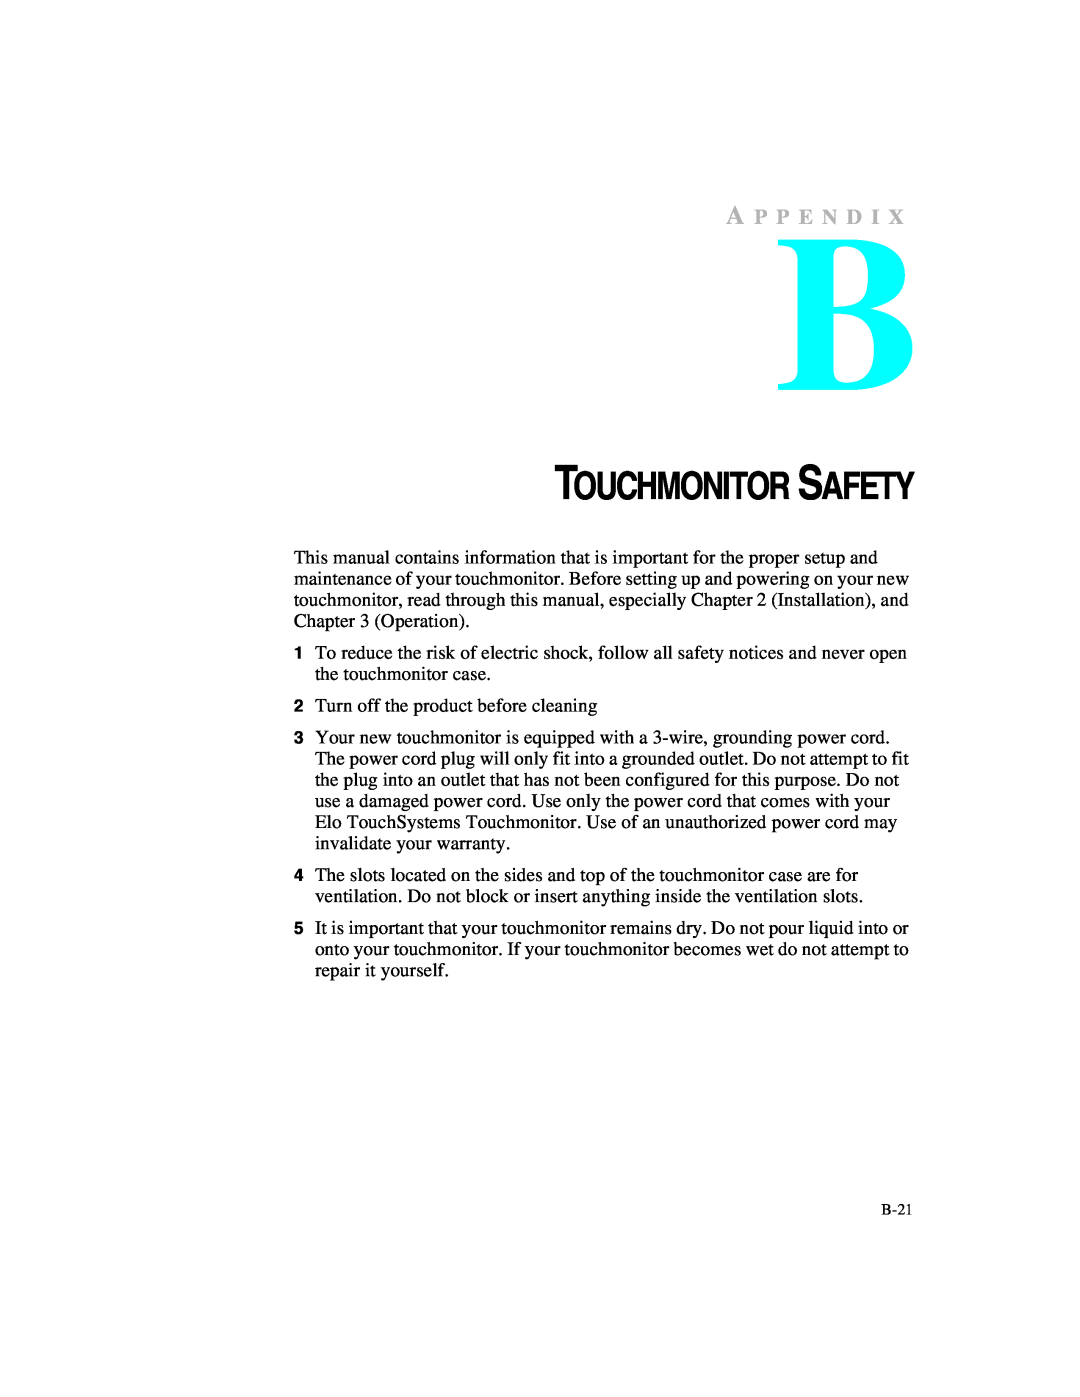 Elo TouchSystems 1247L manual Touchmonitor Safety, A P P E N D I 